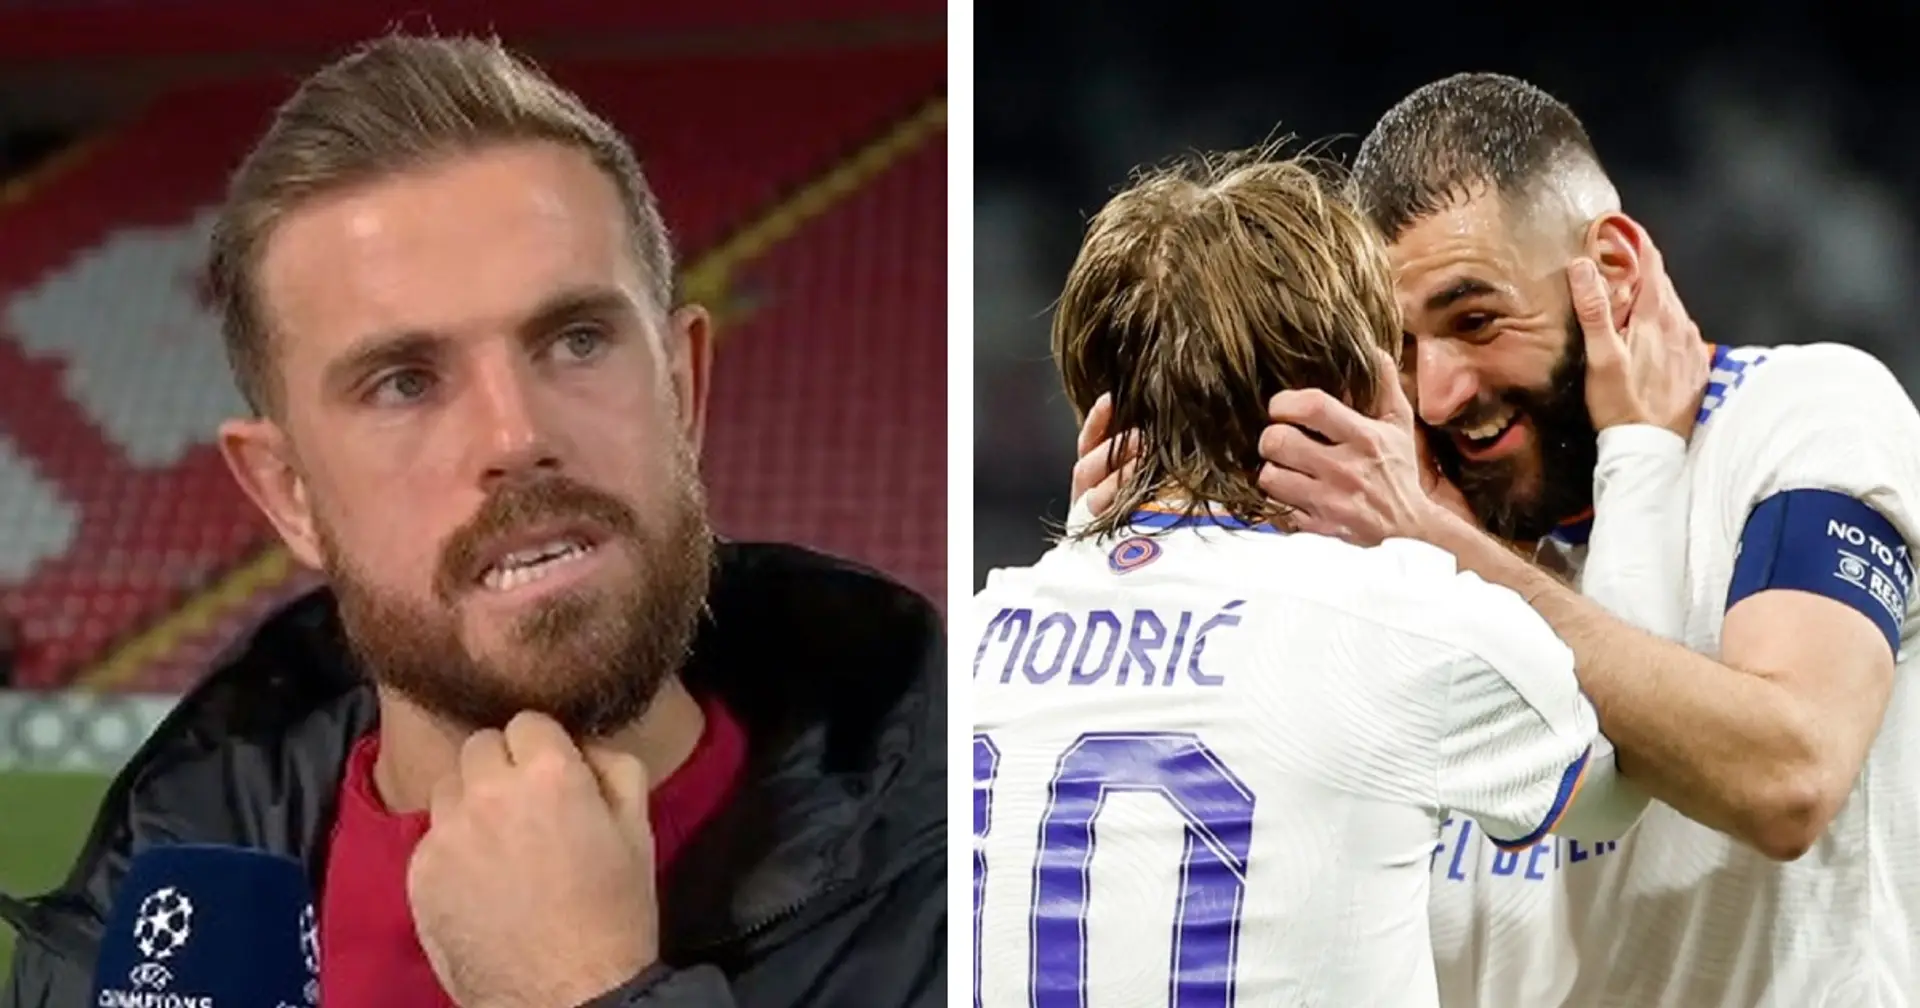 'I'm ready for a new challenge': Jordan Henderson hopes to follow footsteps of Benzema and Modric 